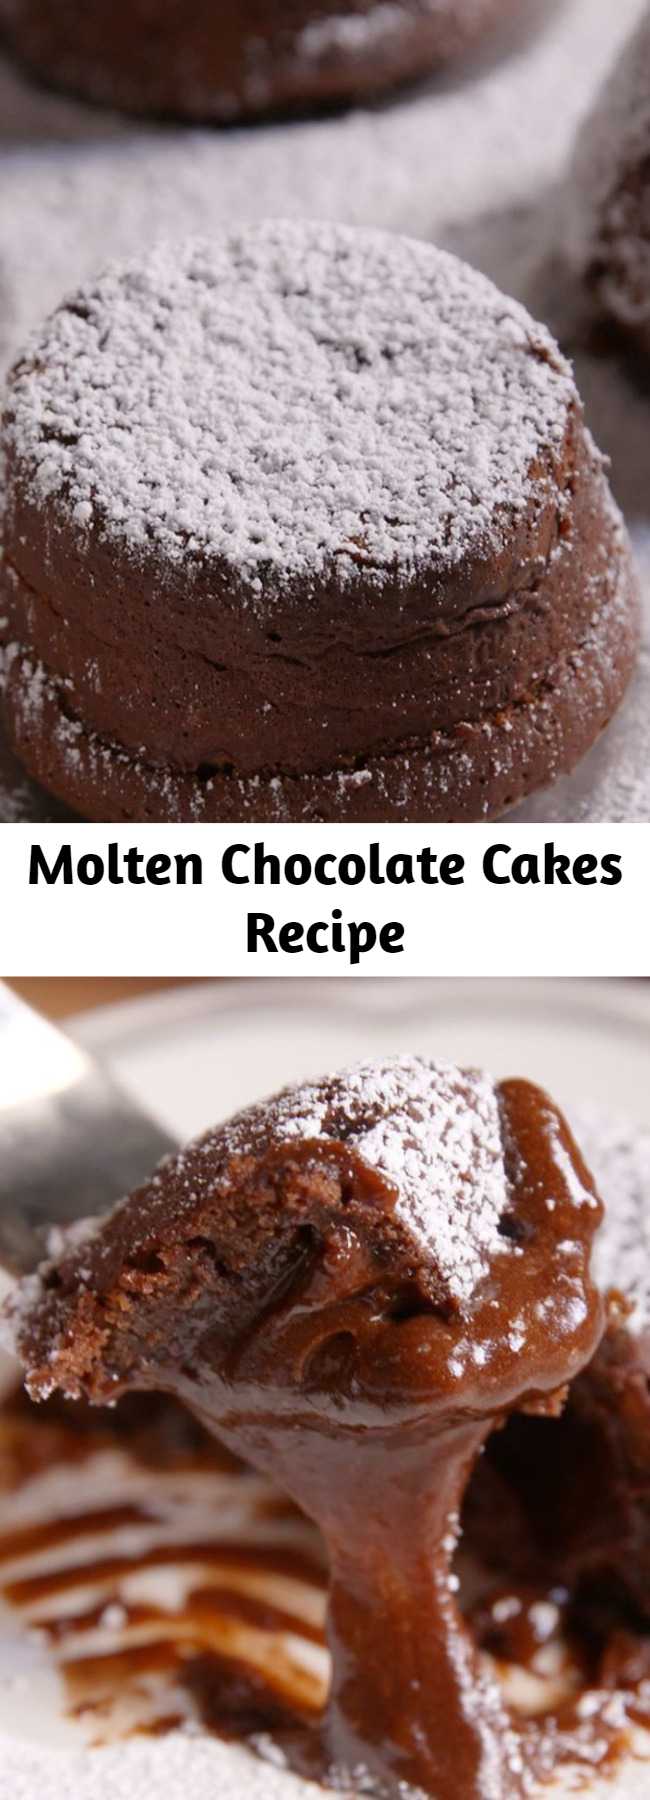 Molten Chocolate Cakes Recipe - Sure, chocolate cake is great. But MOLTEN chocolate cake? For chocolate lovers, this one is the ultimate. Now you don't have to go out to a fancy restaurant for molten chocolate cakes.